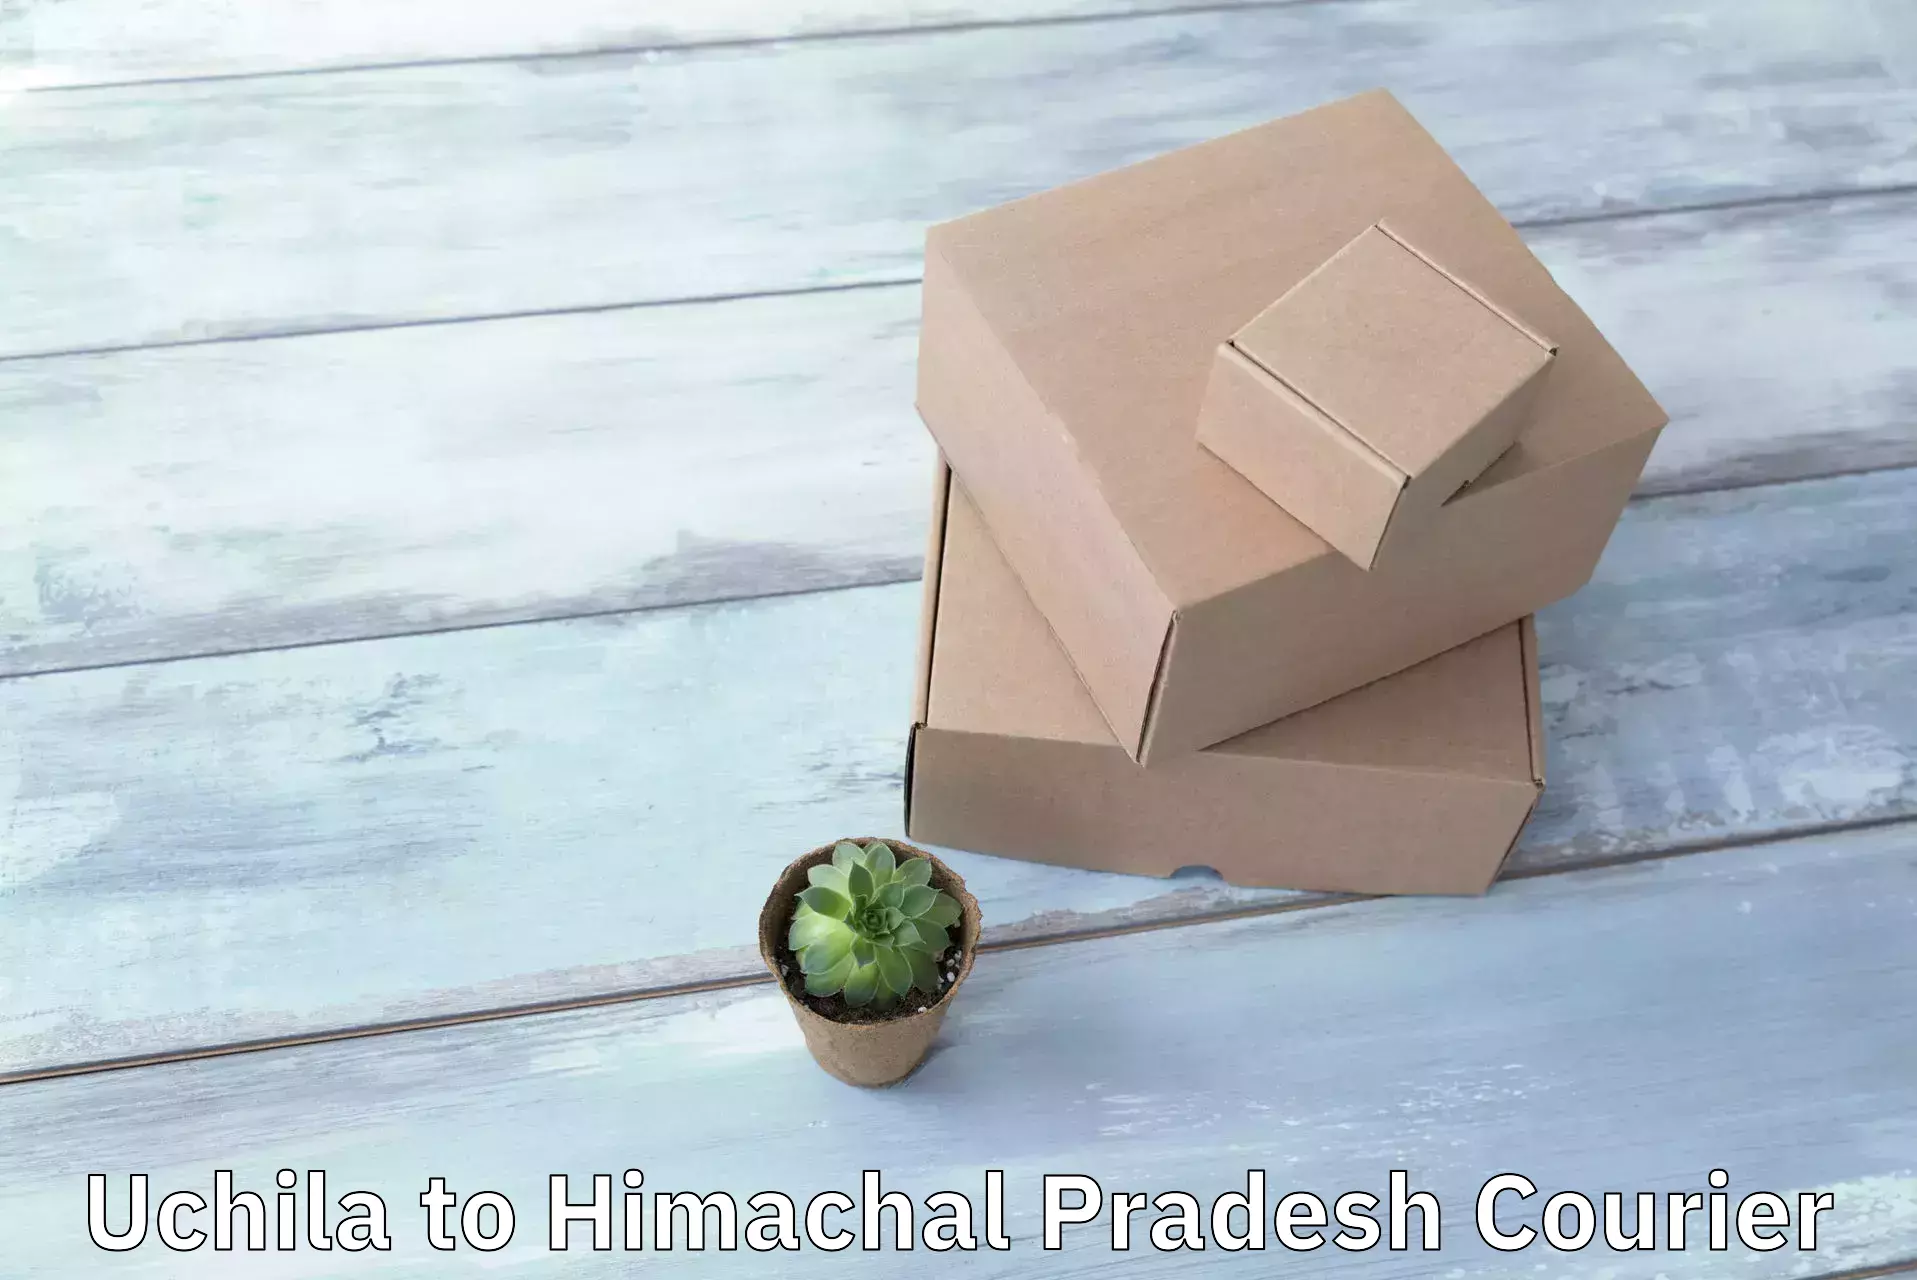 Customer-focused courier Uchila to YS Parmar University of Horticulture and Forestry Solan